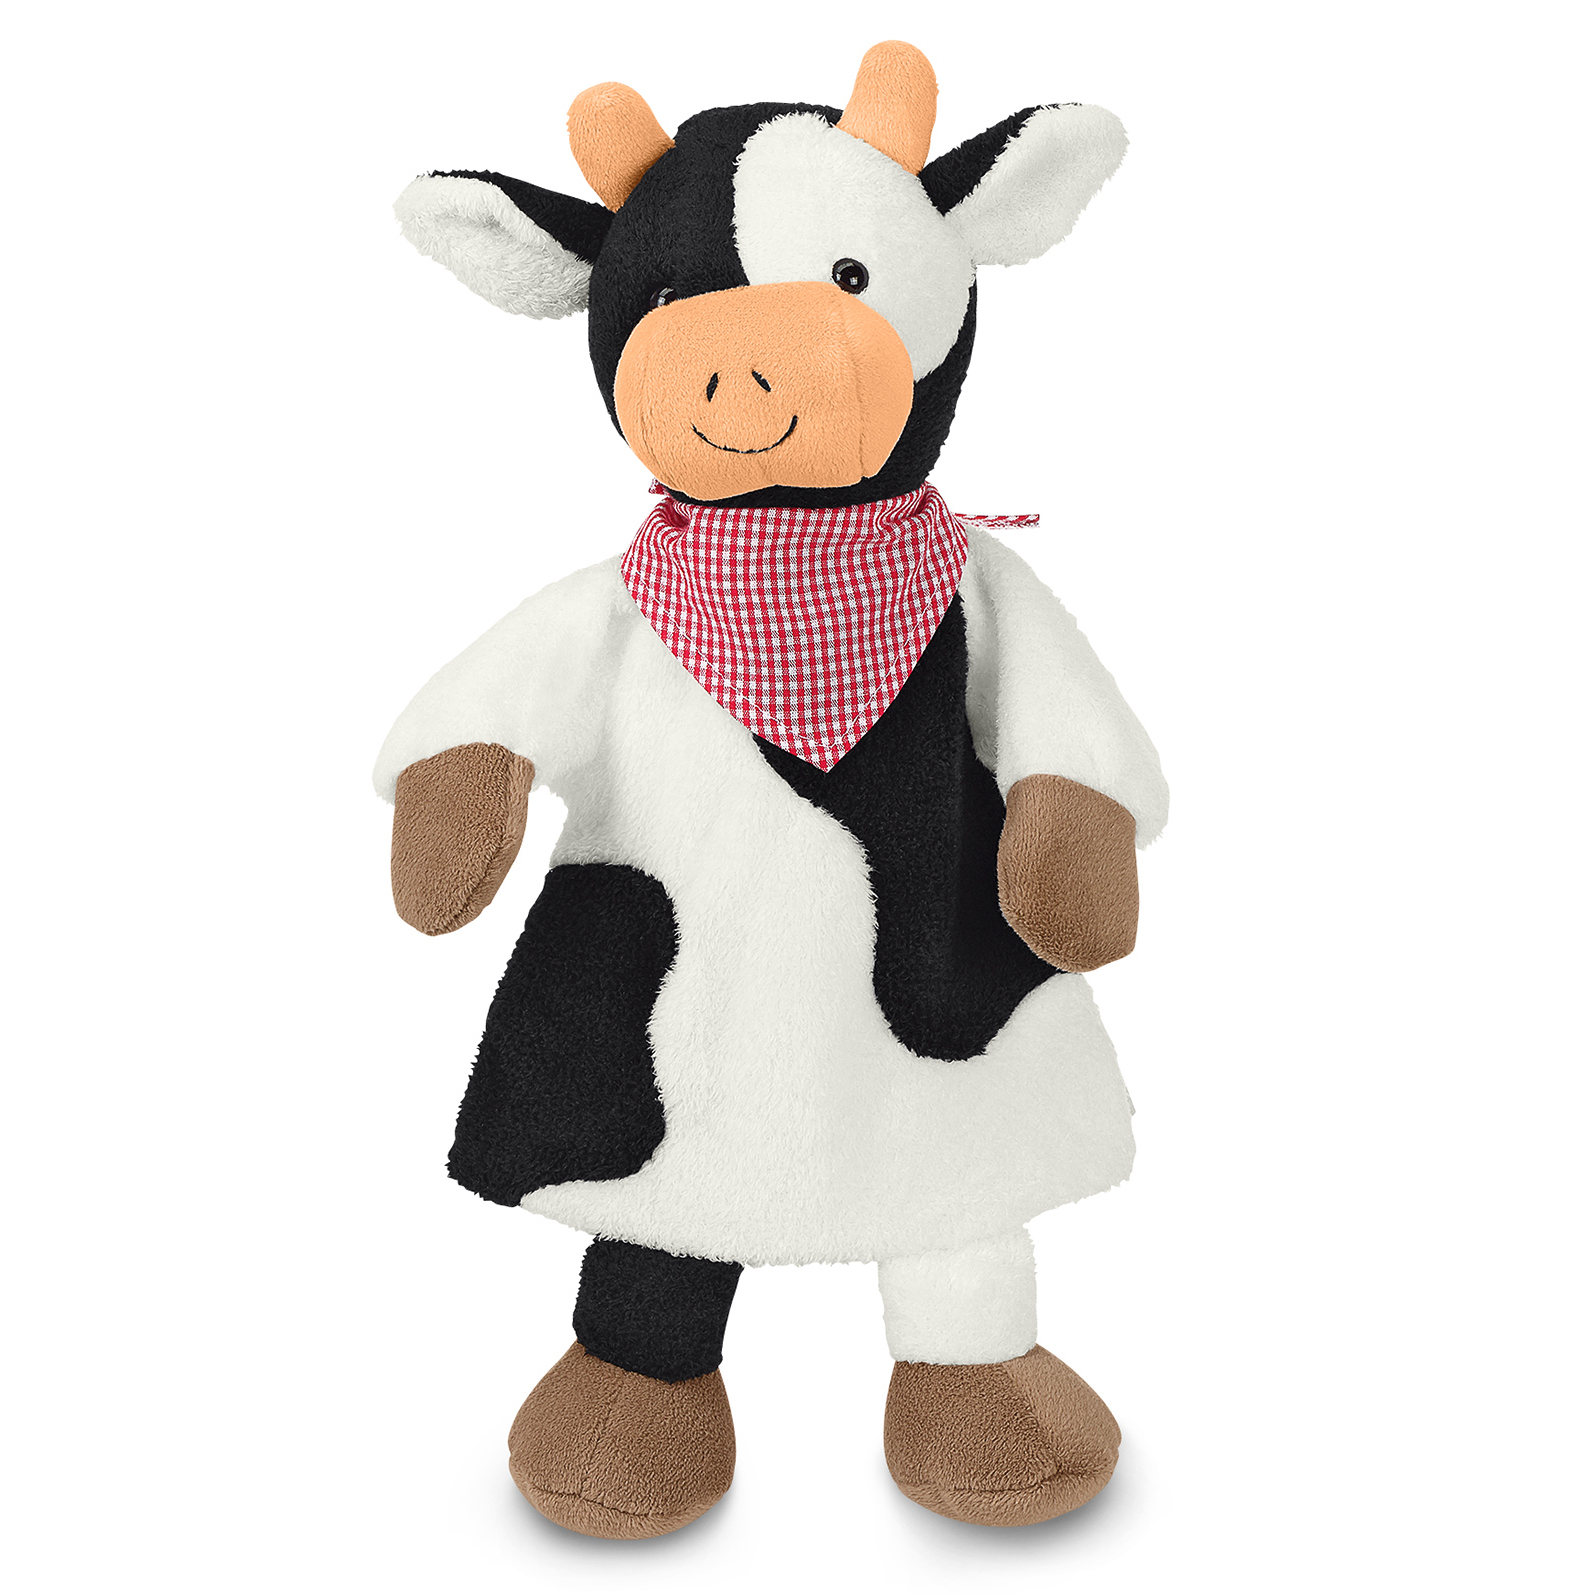 Cow - hand puppet for babies by Sterntaler